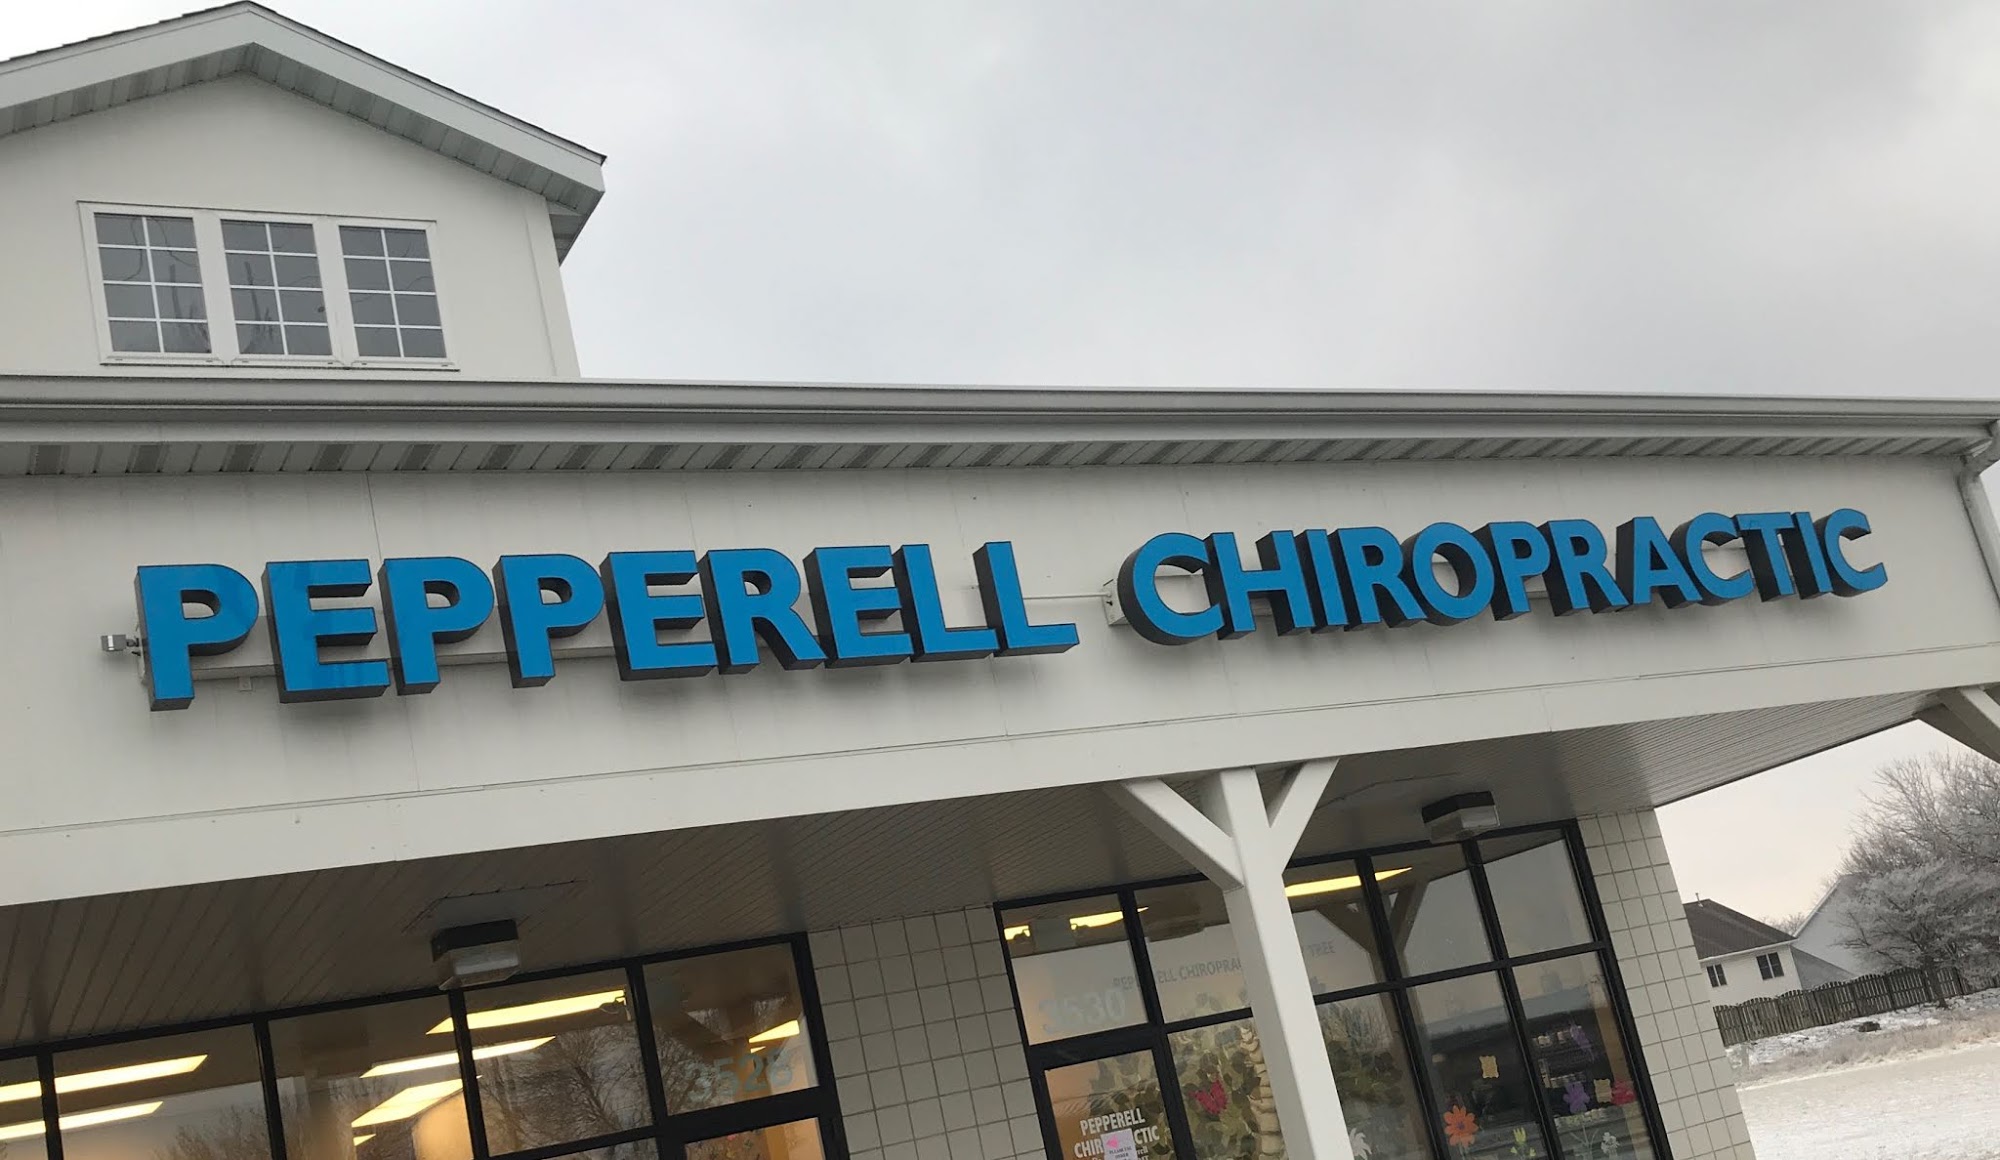 Pepperell Chiropractic